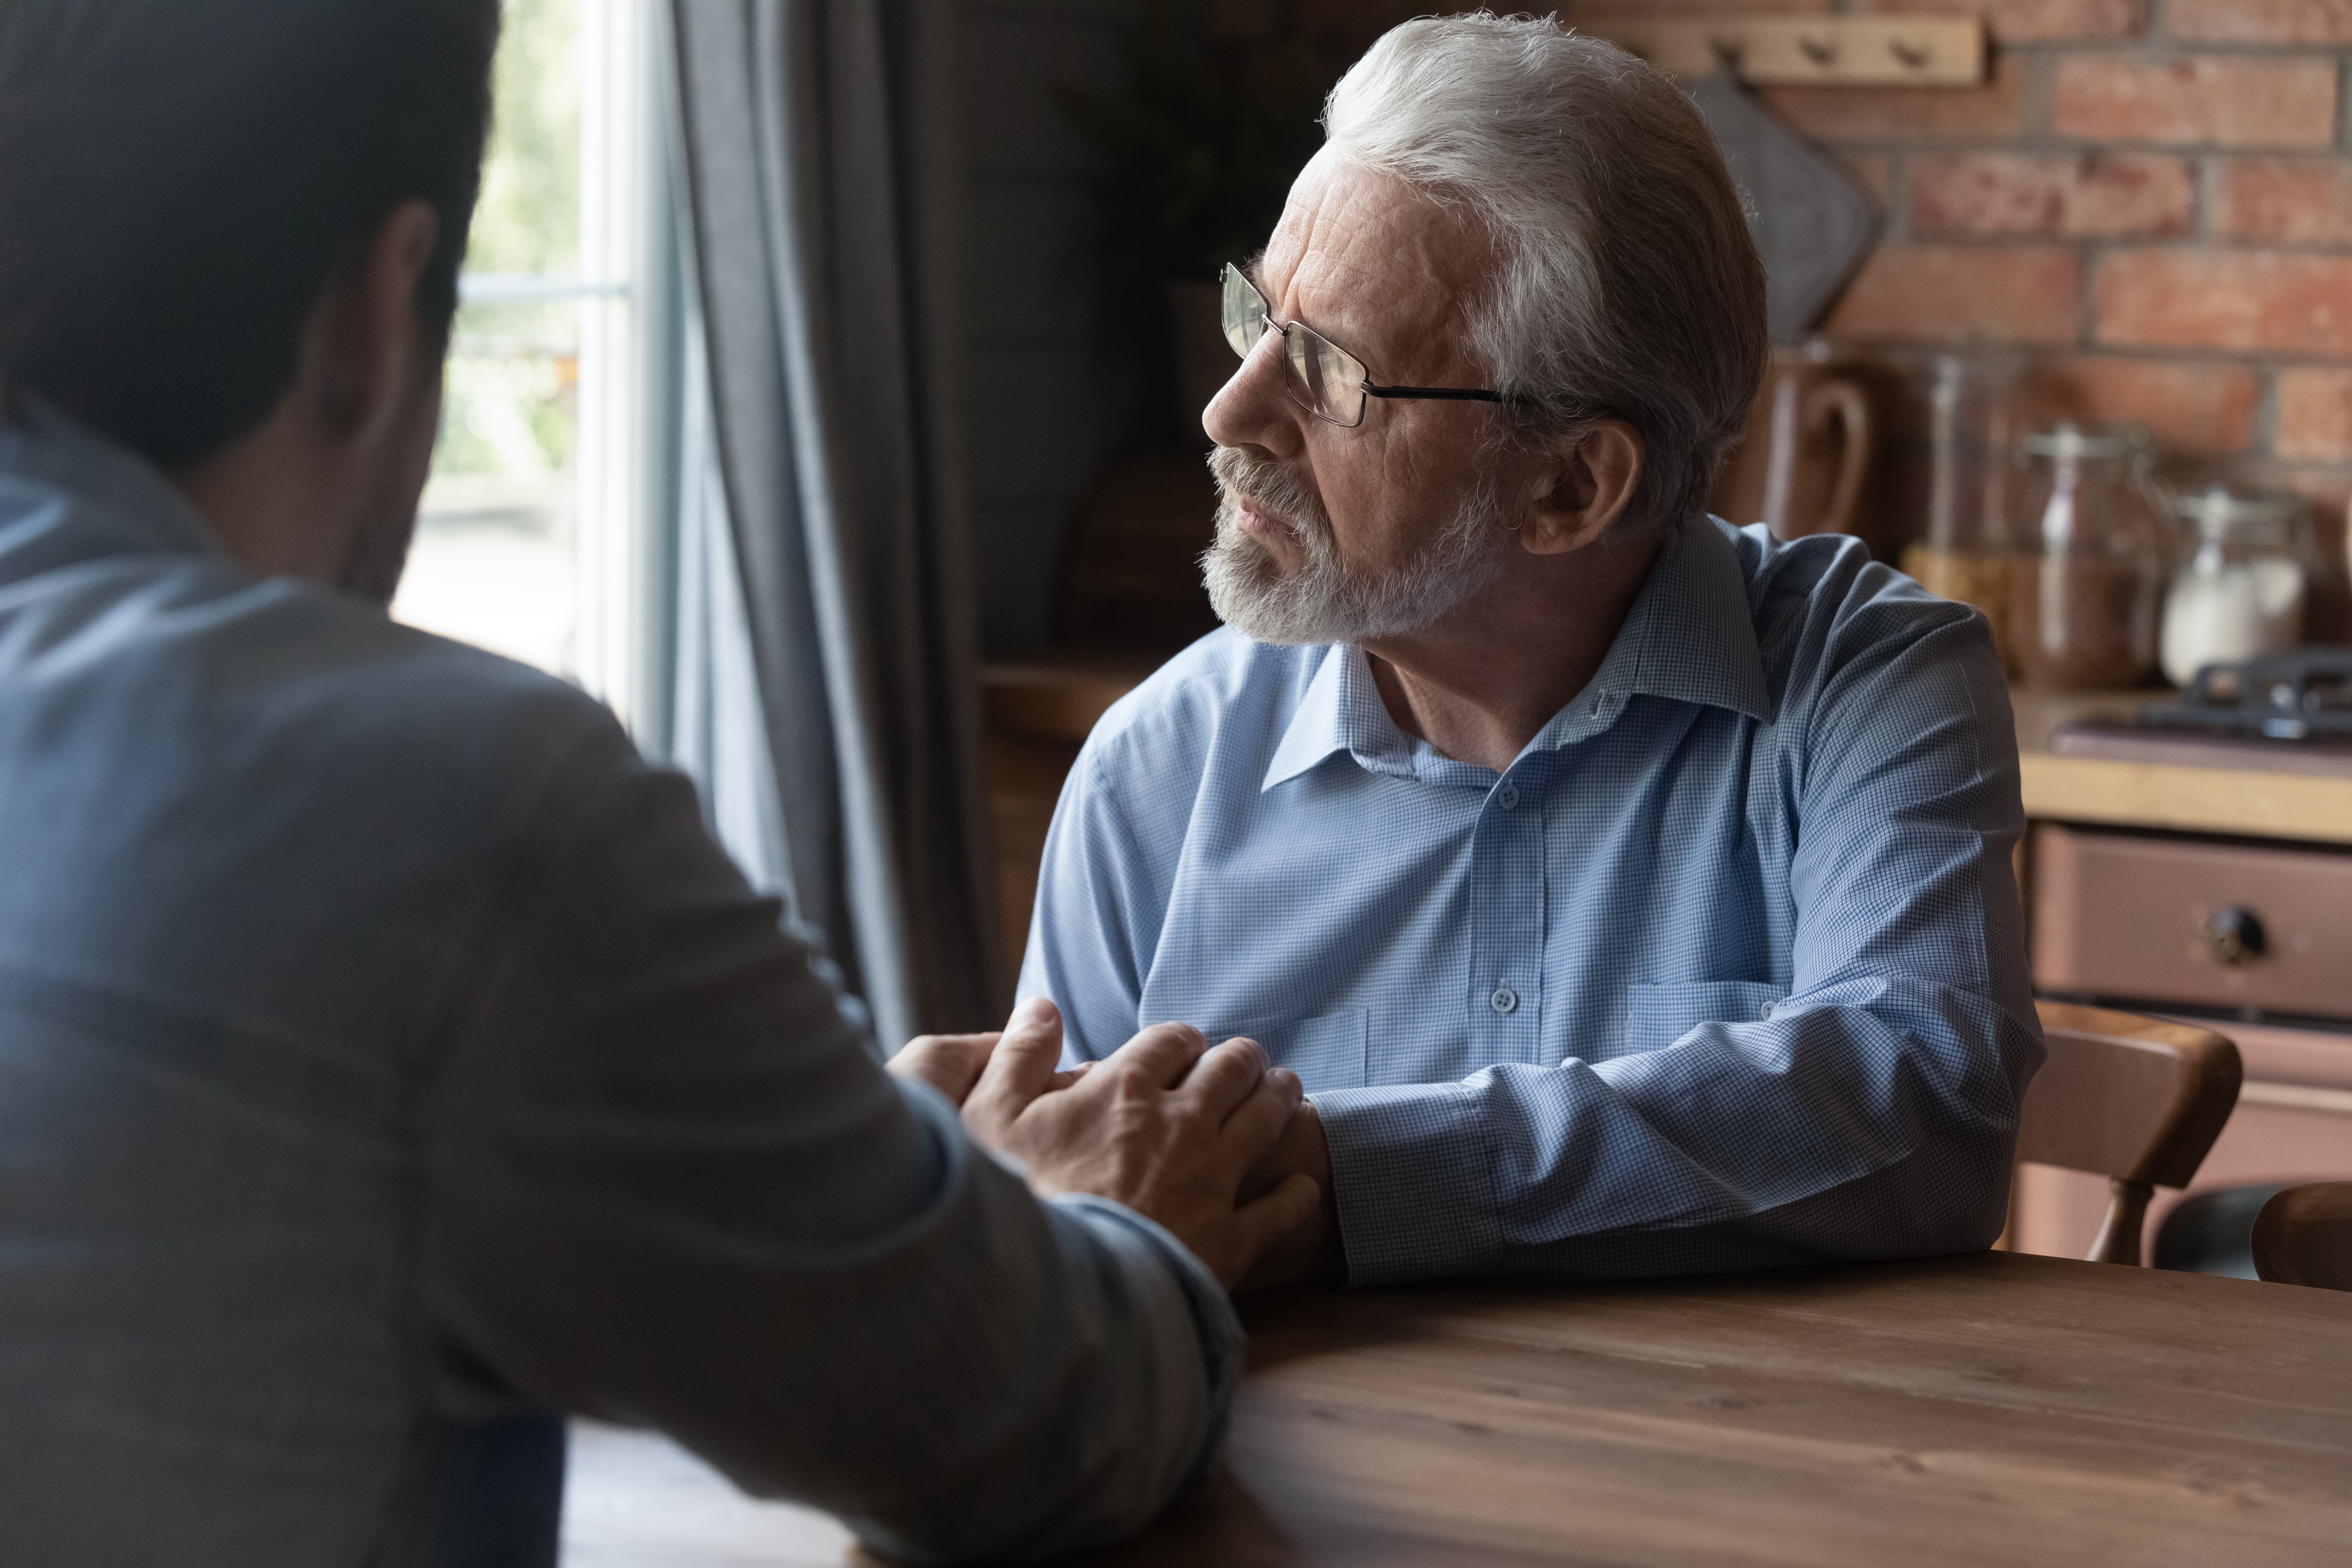 A young man comforting an older man who looks away | Source: Shutterstock